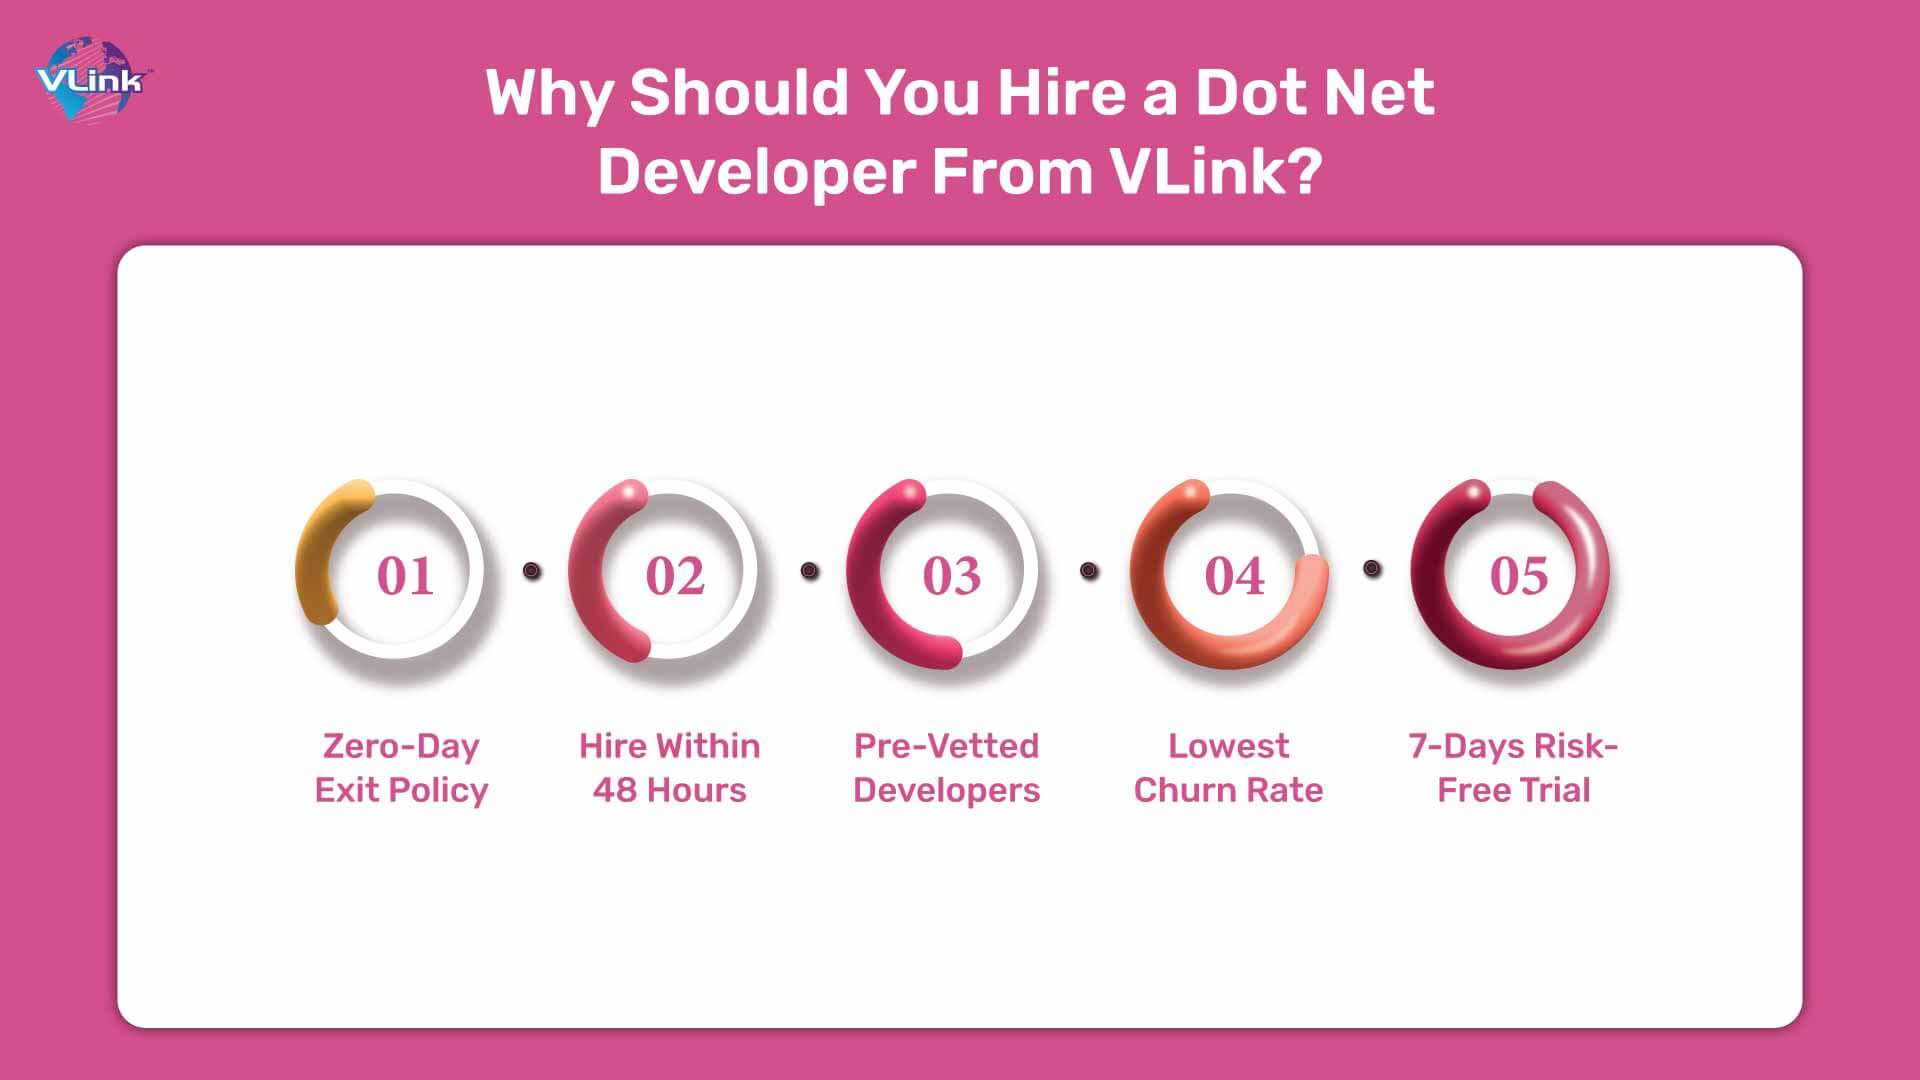 Why Should You Hire Dot-Net Developers From VLink